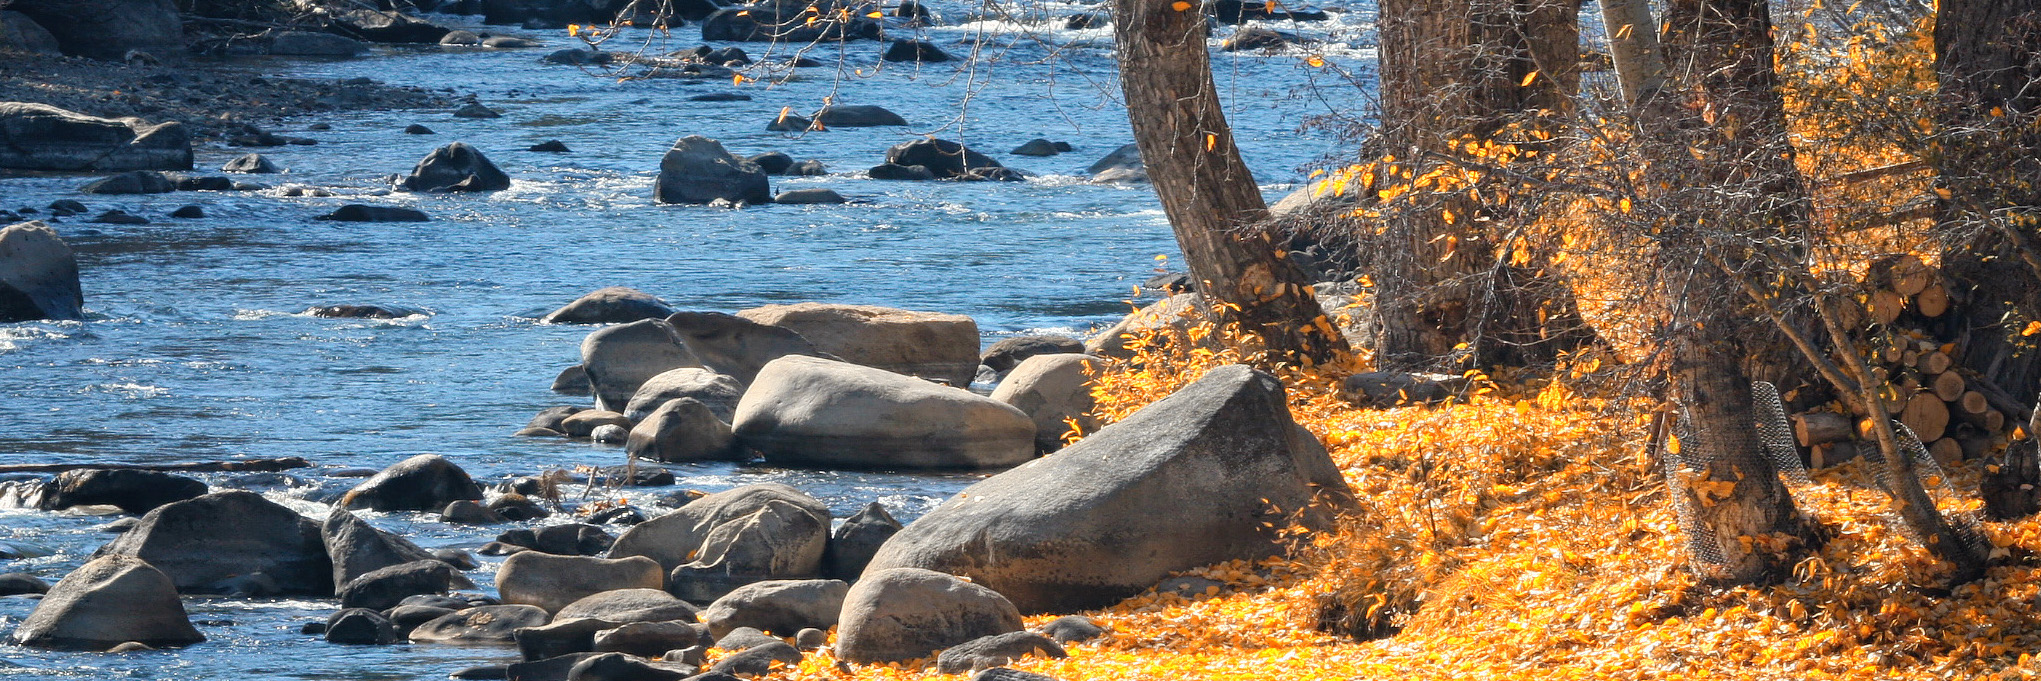 Truckee River with bright orange autumn leaves